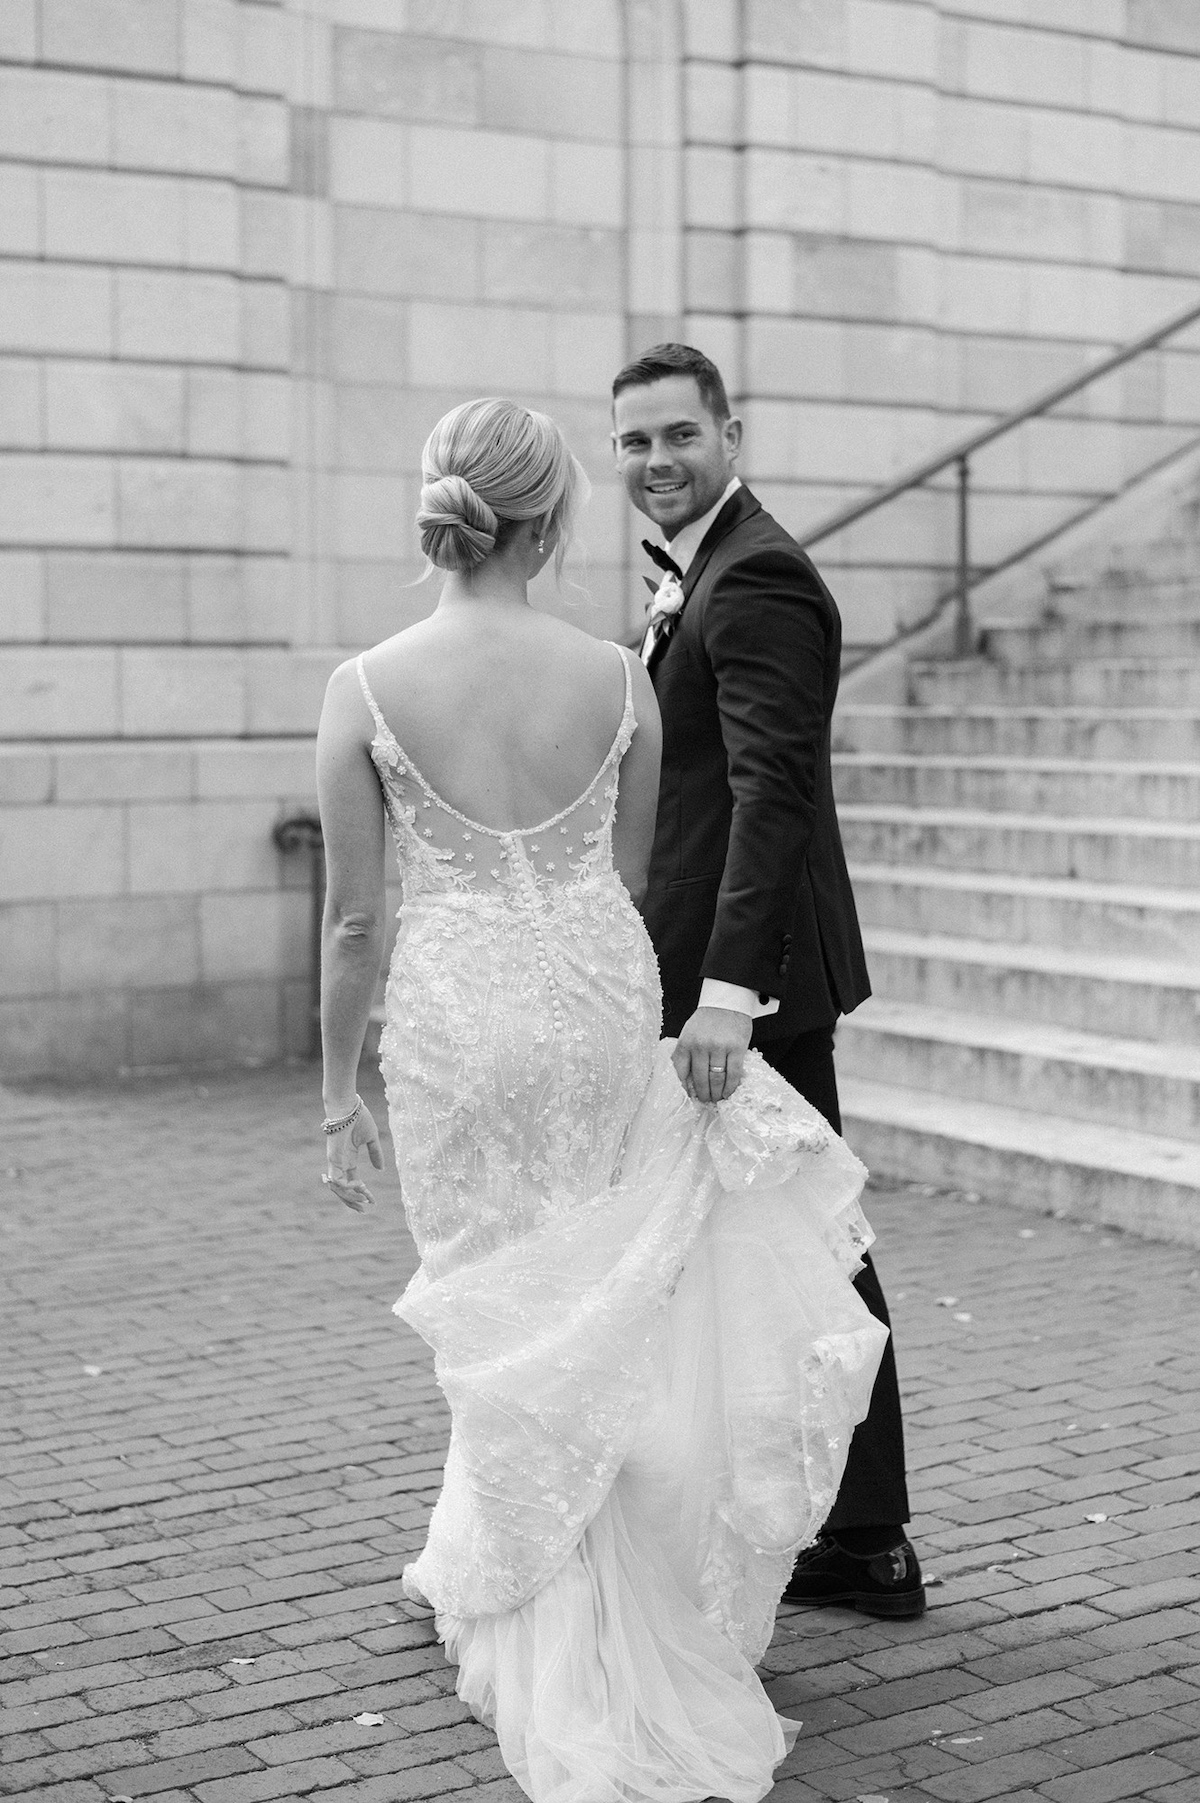 Chic editorial portrait capturing a leisurely stroll through urban alleys of Lancaster City, the bride and groom immersed in high-end urban charm.